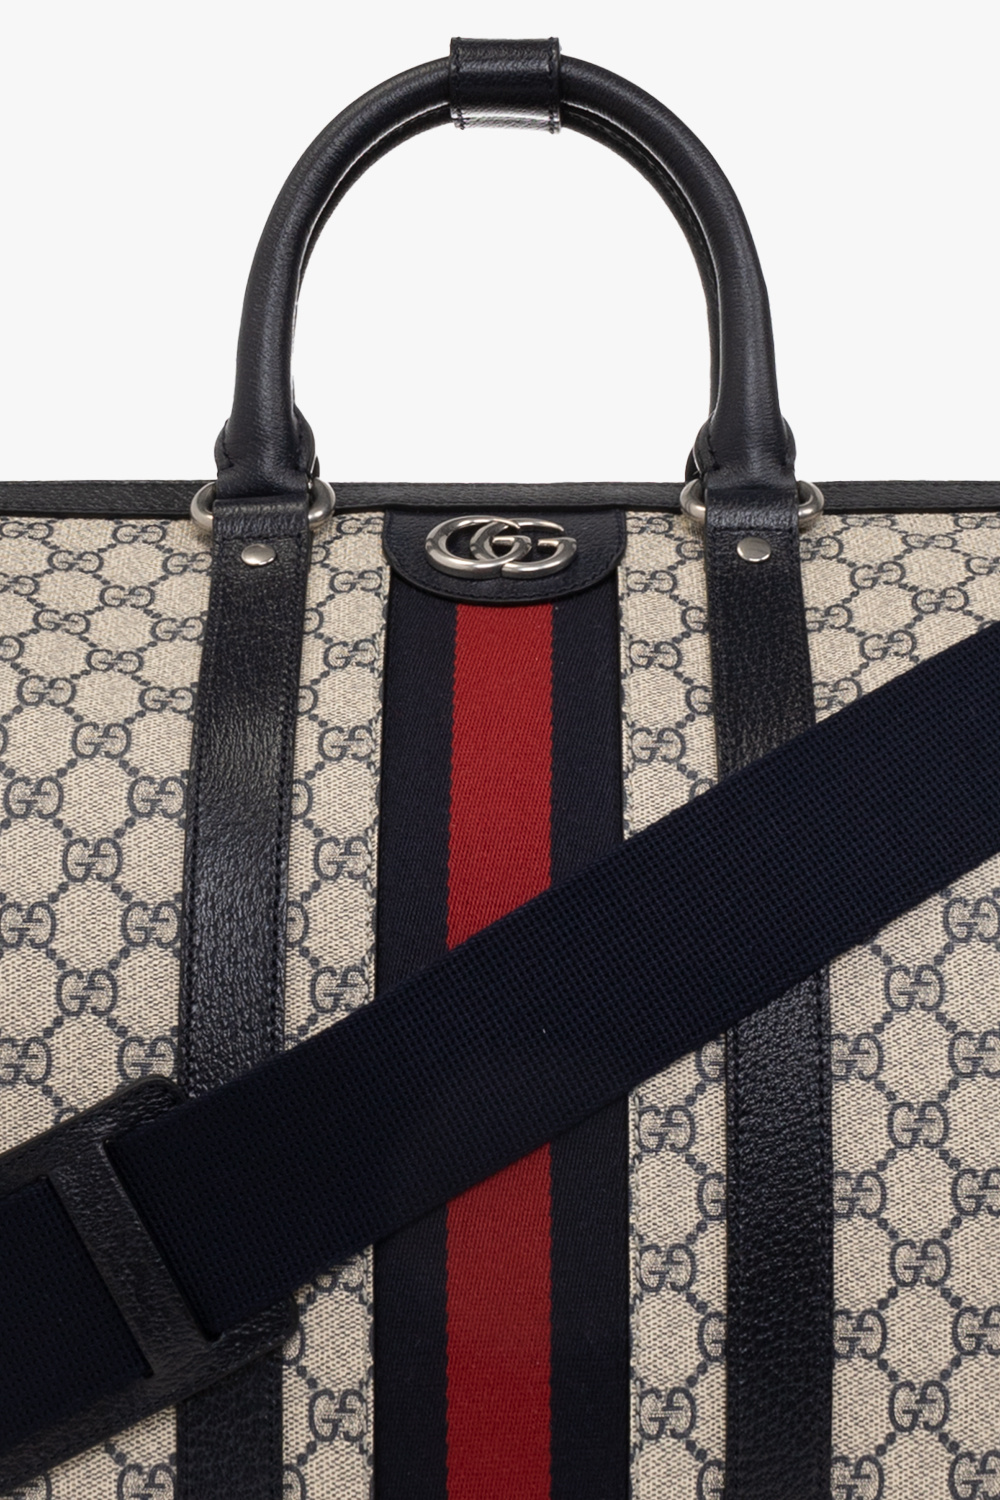 Gucci - A look at the new Gucci Ophidia tote bag from Gucci Pre